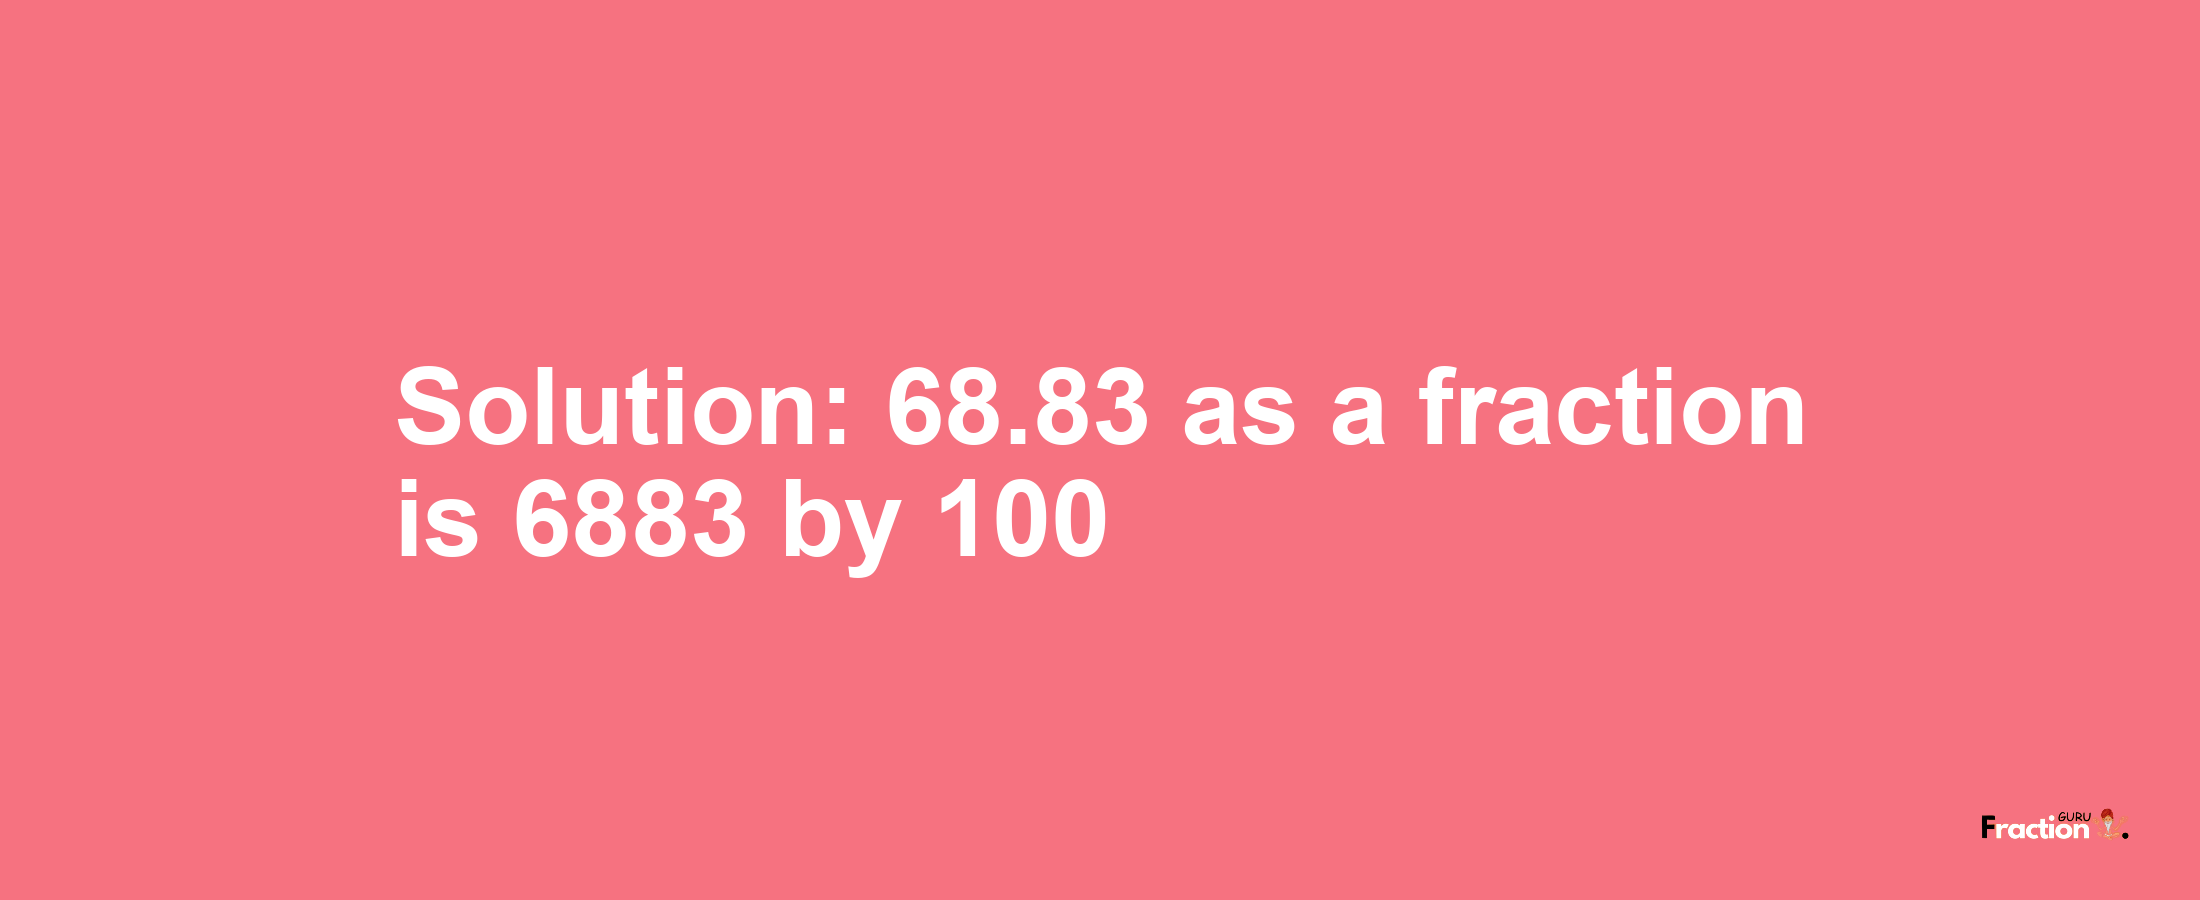 Solution:68.83 as a fraction is 6883/100